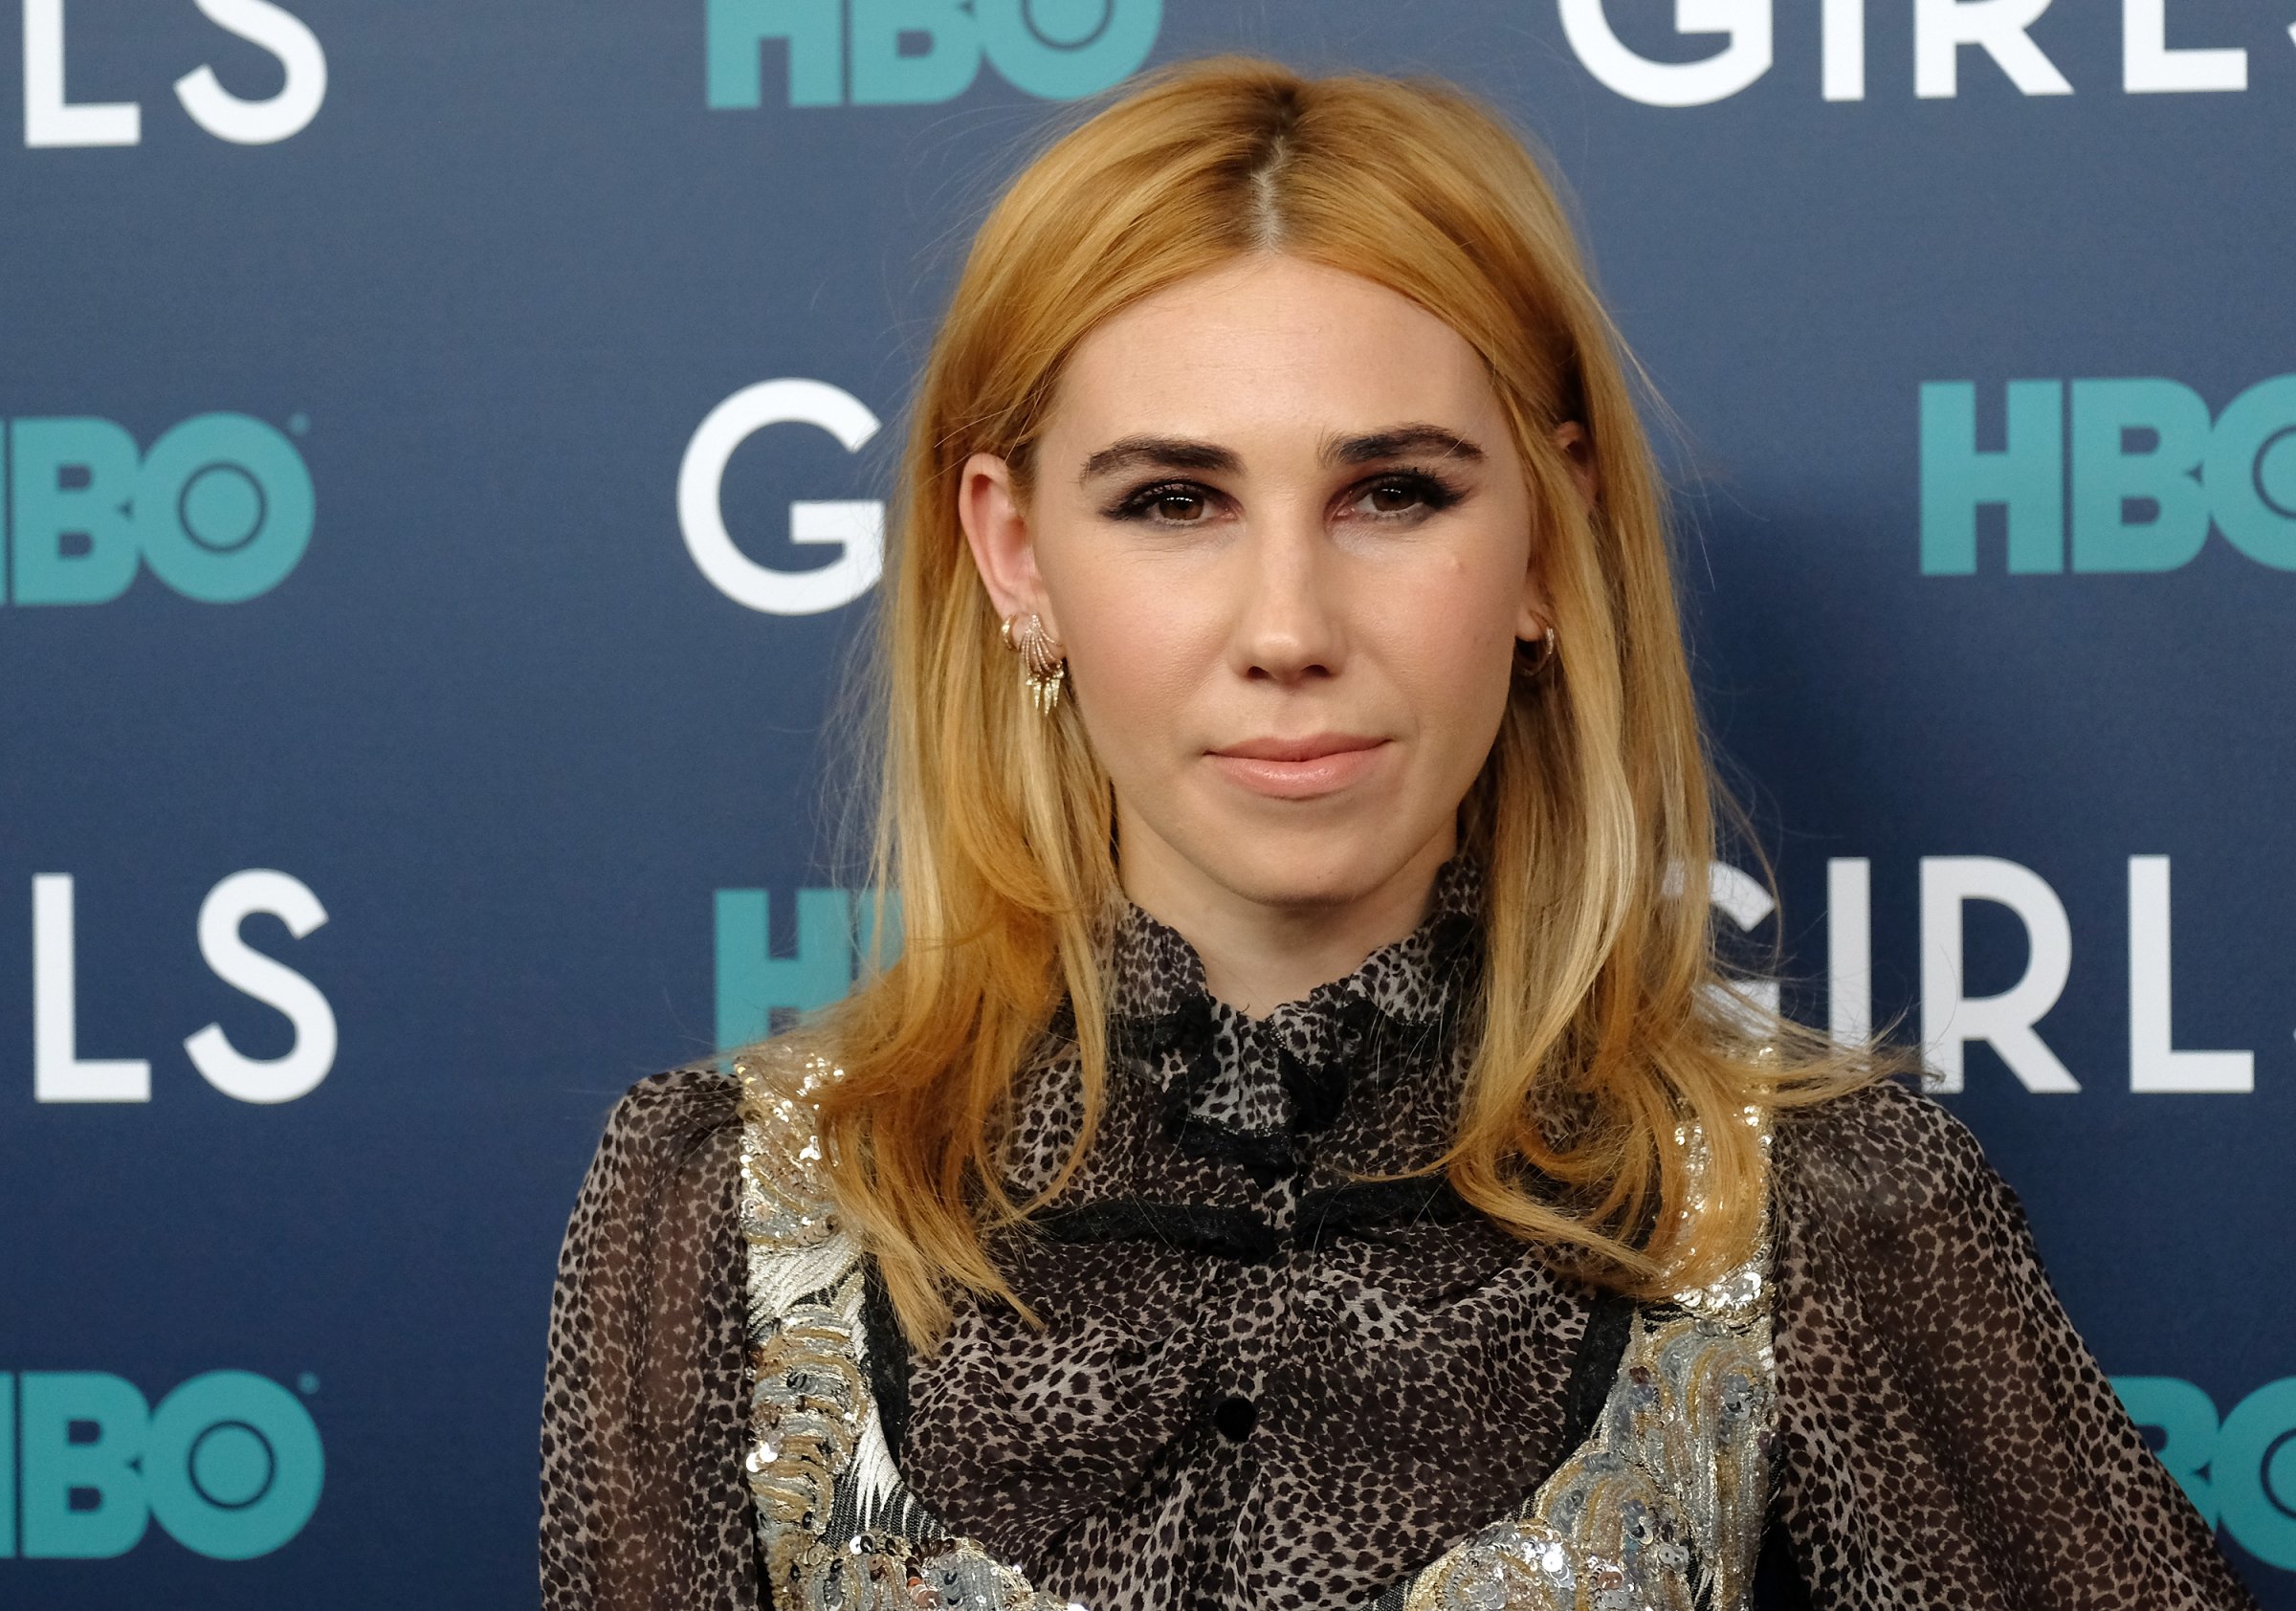 The New York Premiere Of The Sixth &amp; Final Season Of "Girls"